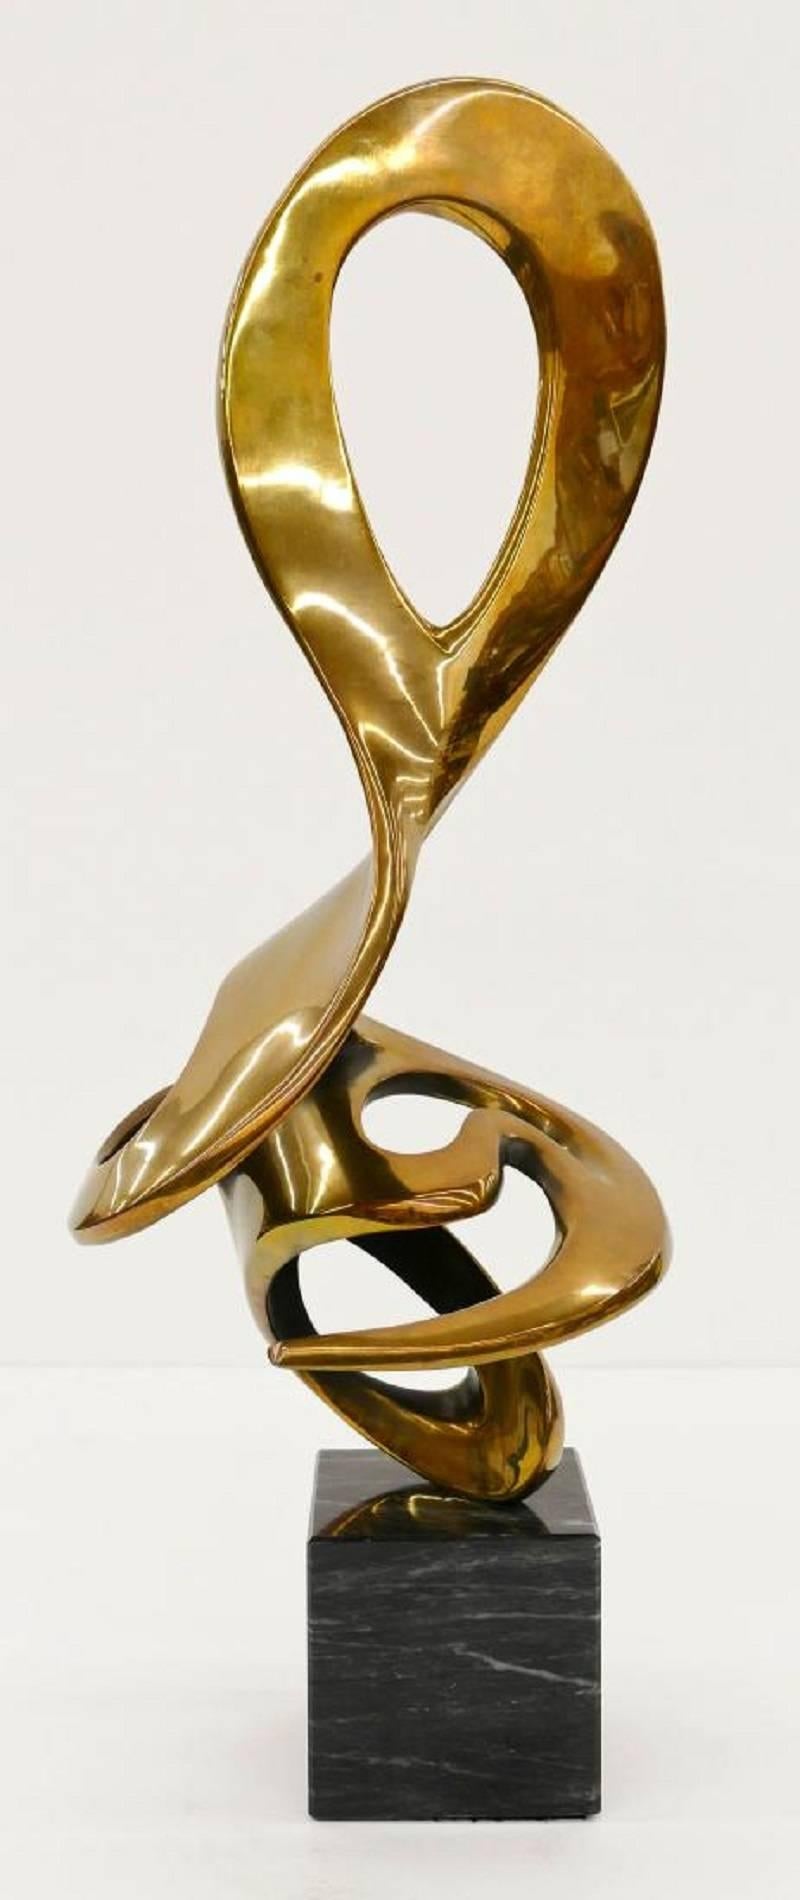 This exuberant abstract sculpture by artist Robert ‘Bob’ Bennett is titled ‘Innovation’ and is created of bronze. The piece is signed and number (18 of 50 edition) and comes with an original certificate of authenticity.
Measures: 23 H x 8 W x 8 D